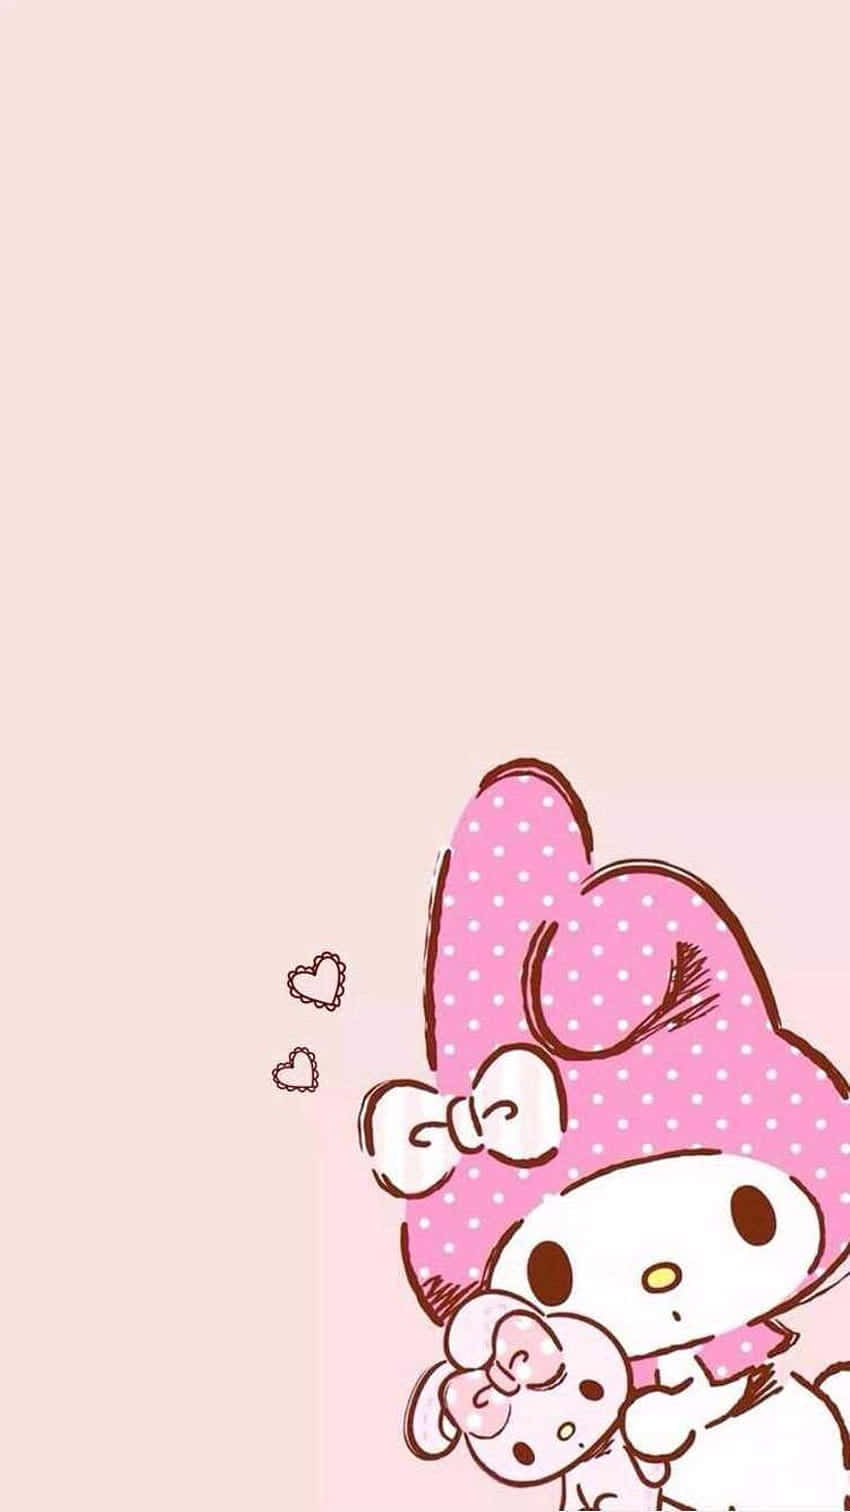 Cute My Melody Pink Bunny Ears Wallpaper